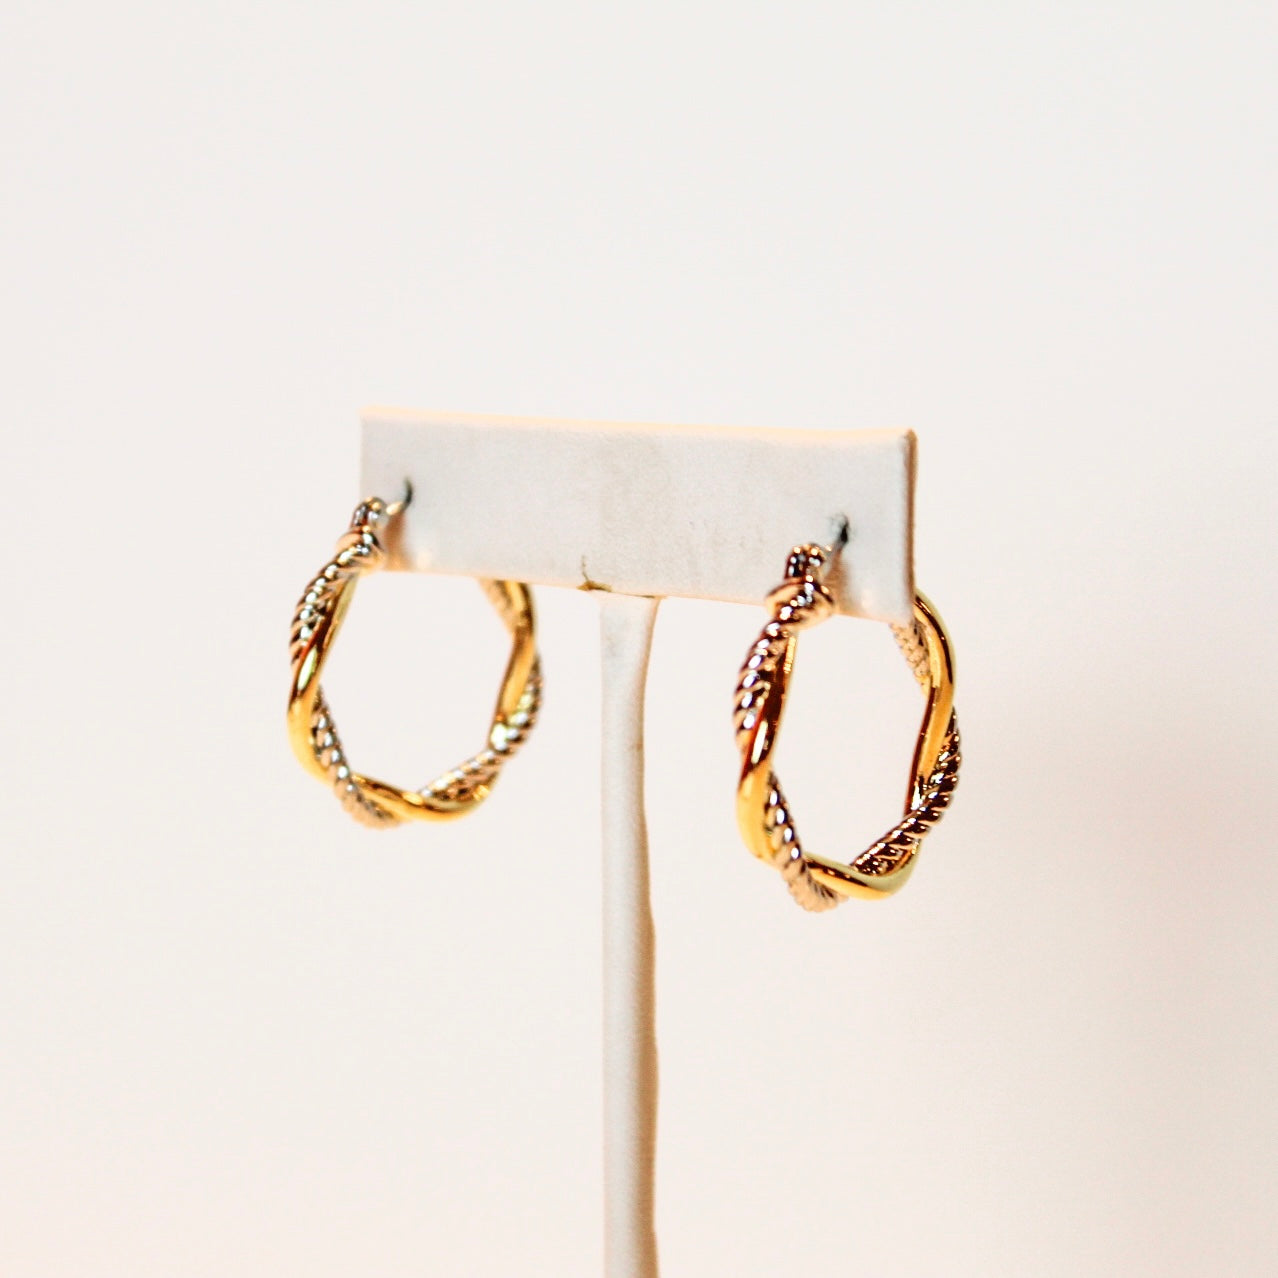 All Tied Up Earrings